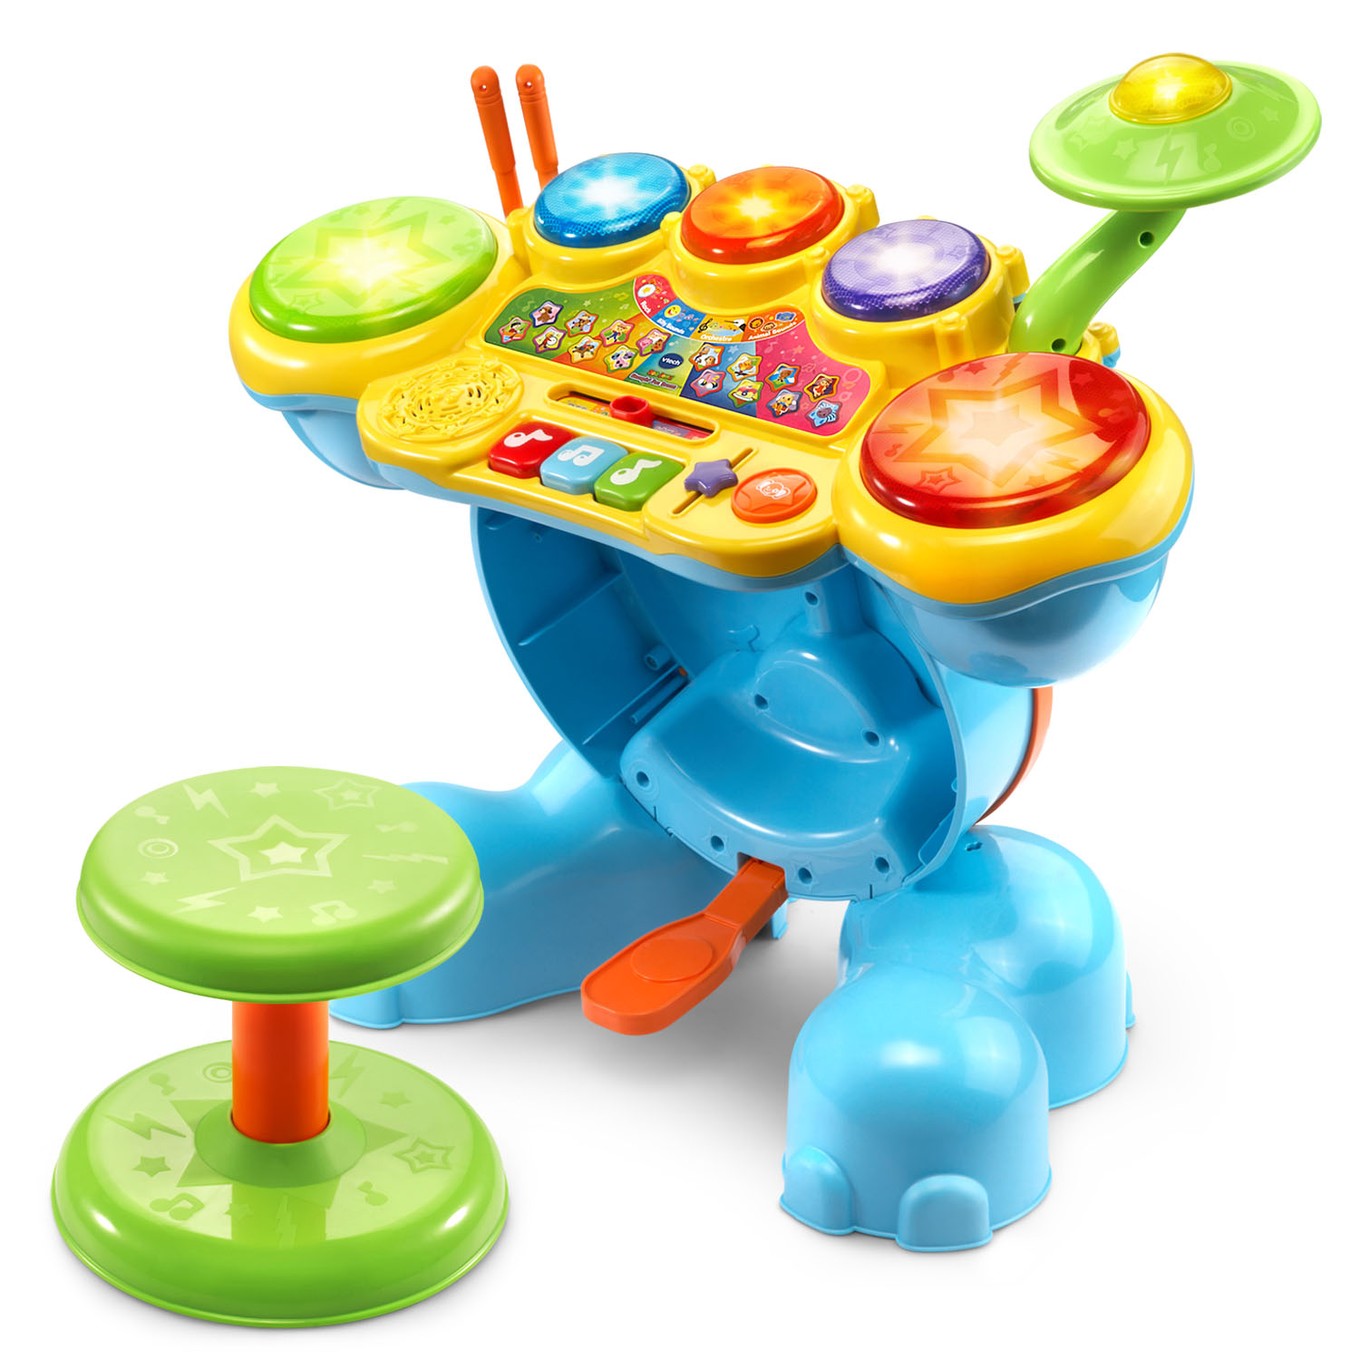 vtech drum set with stool